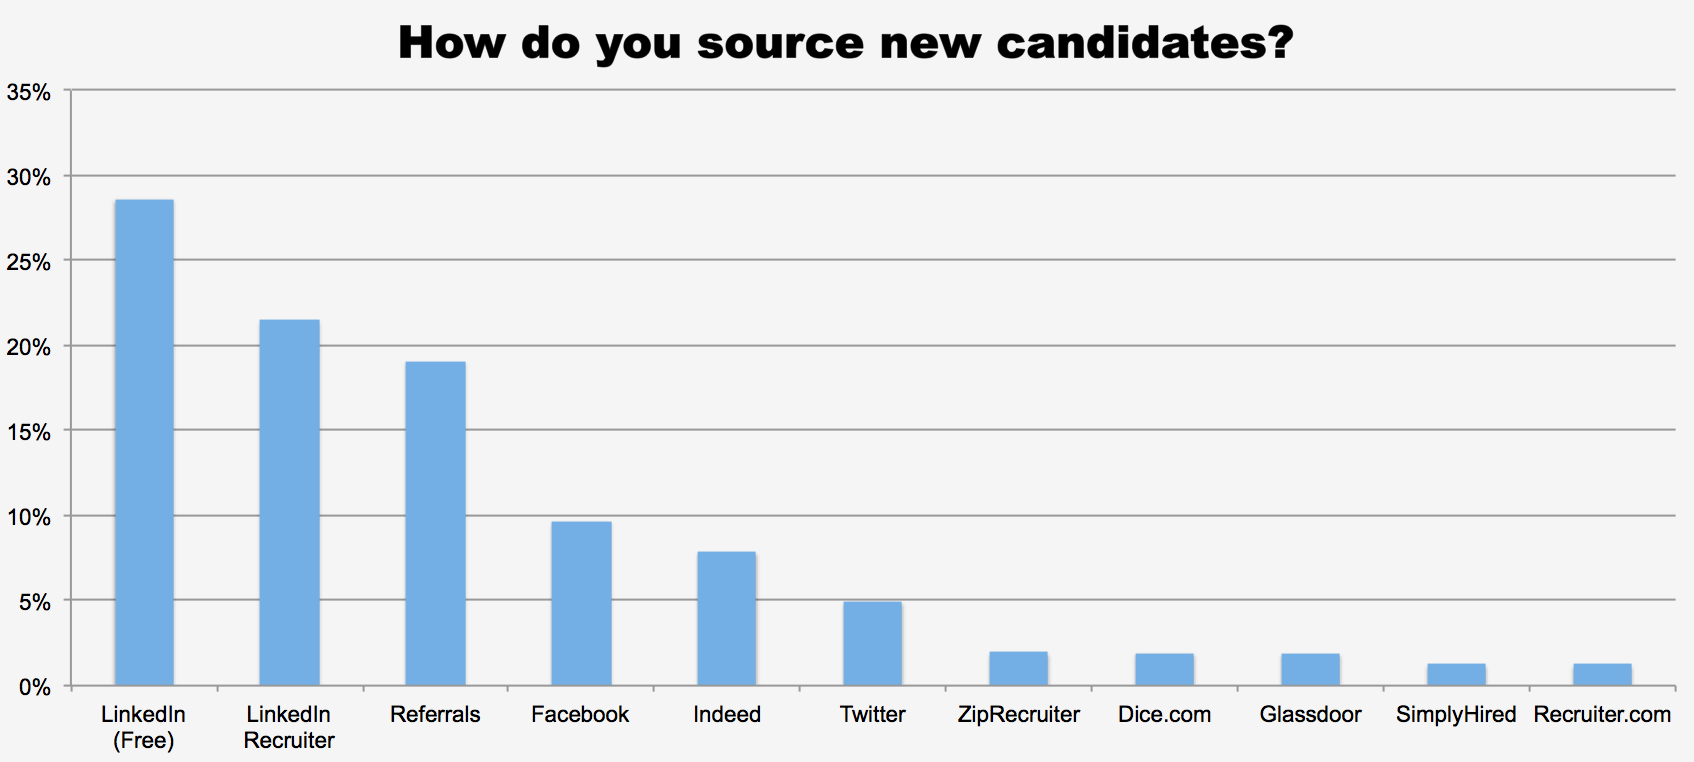 How do you source new candidates?